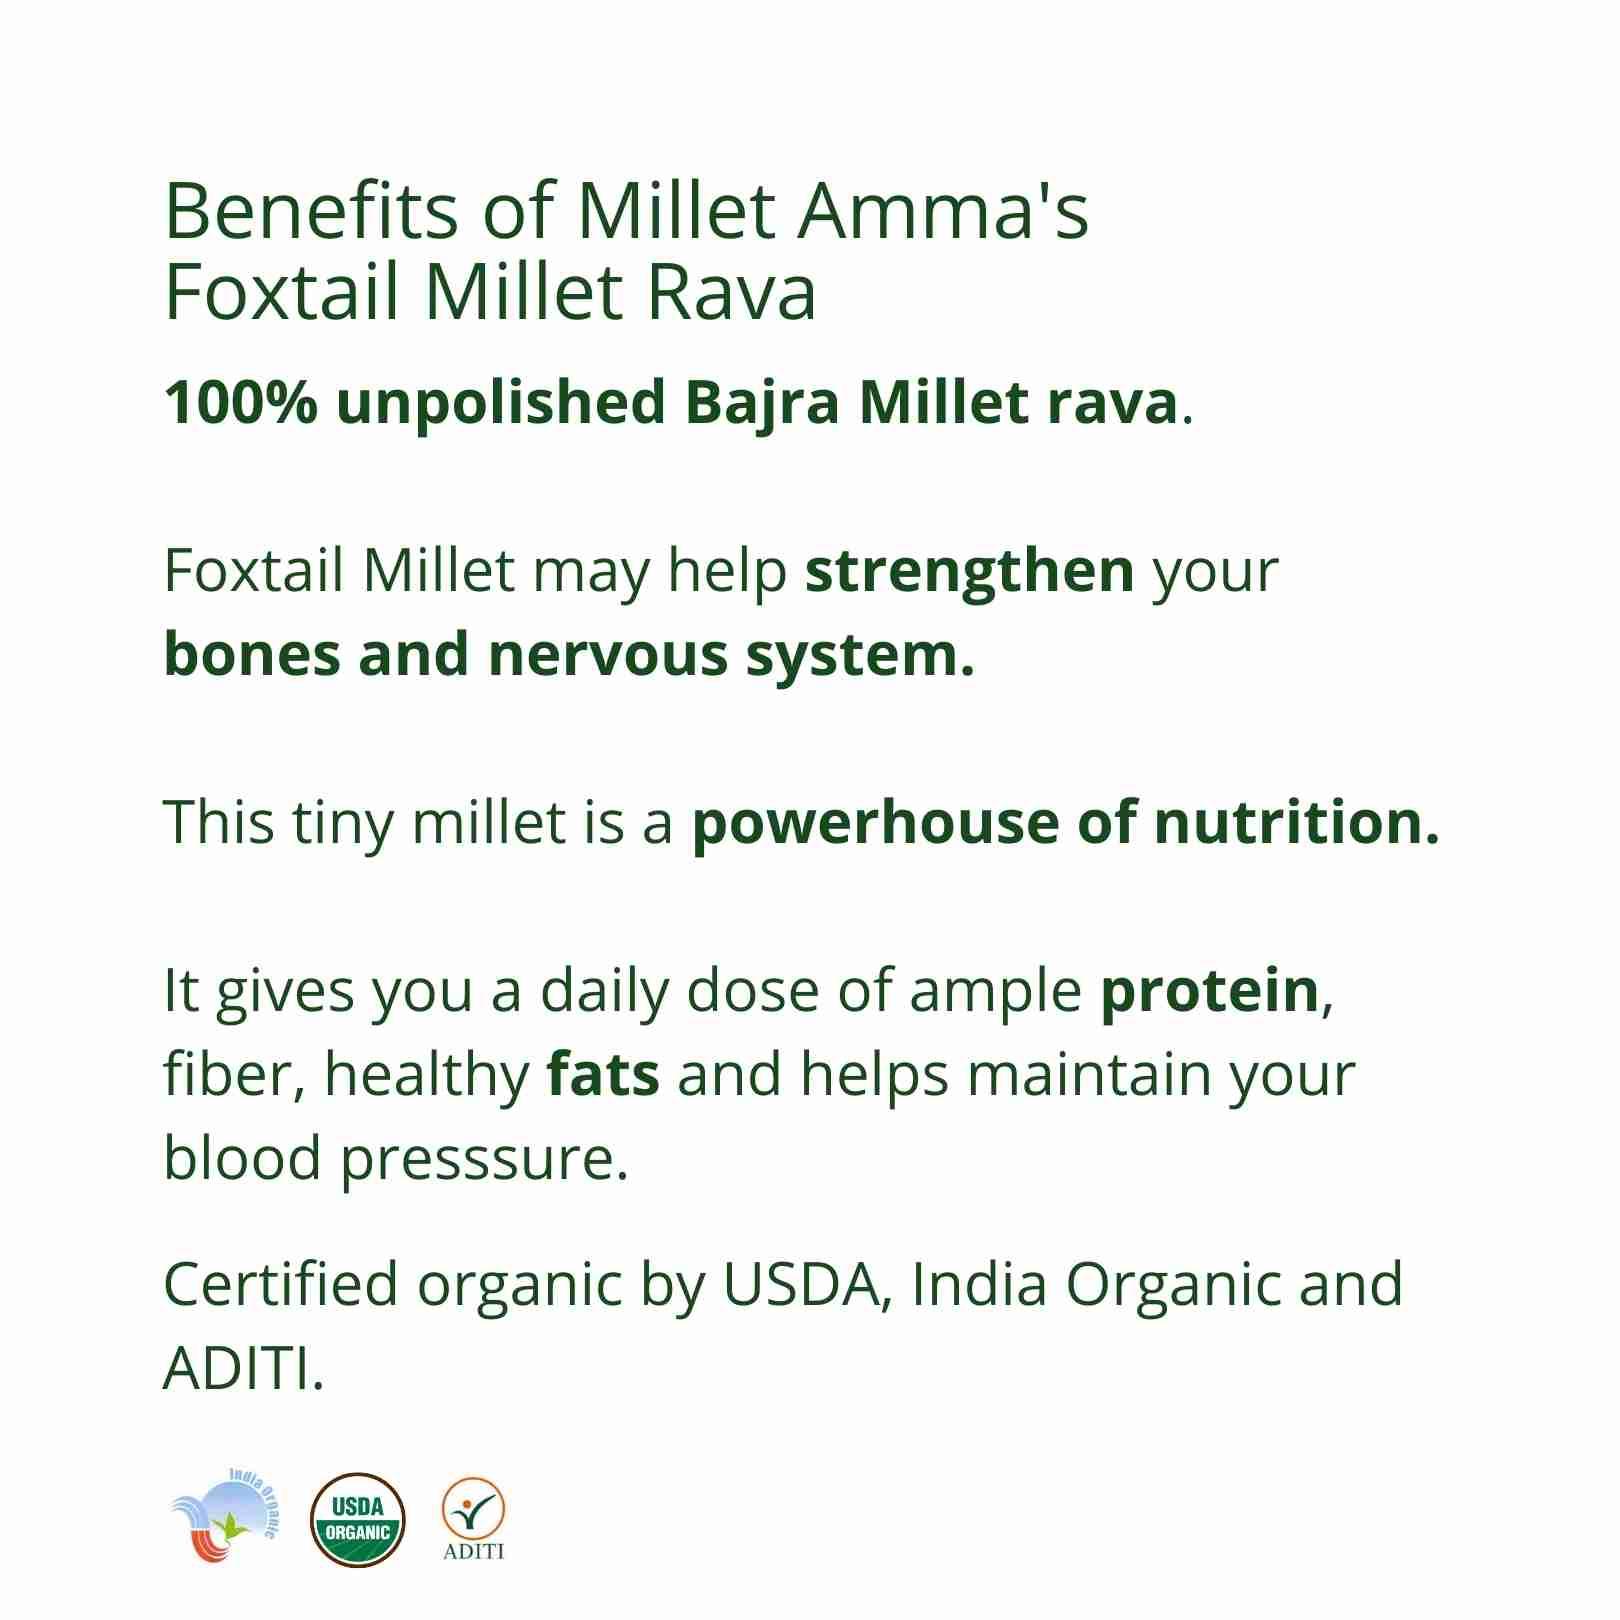 Millet Amma’s Organic Foxtail Millet Rava- Millet Amma’s Organic Foxtail Millet Rava is rich in vitamin B12.  Sourced using premium unpolished Foxtail Millets, it offers you a daily dose of protein, fiber and good fats.  You can make a variety of dishes with our Gluten-free Foxtail Millet Rava like upma, kheer, dosa, idli, puttu and porridge.